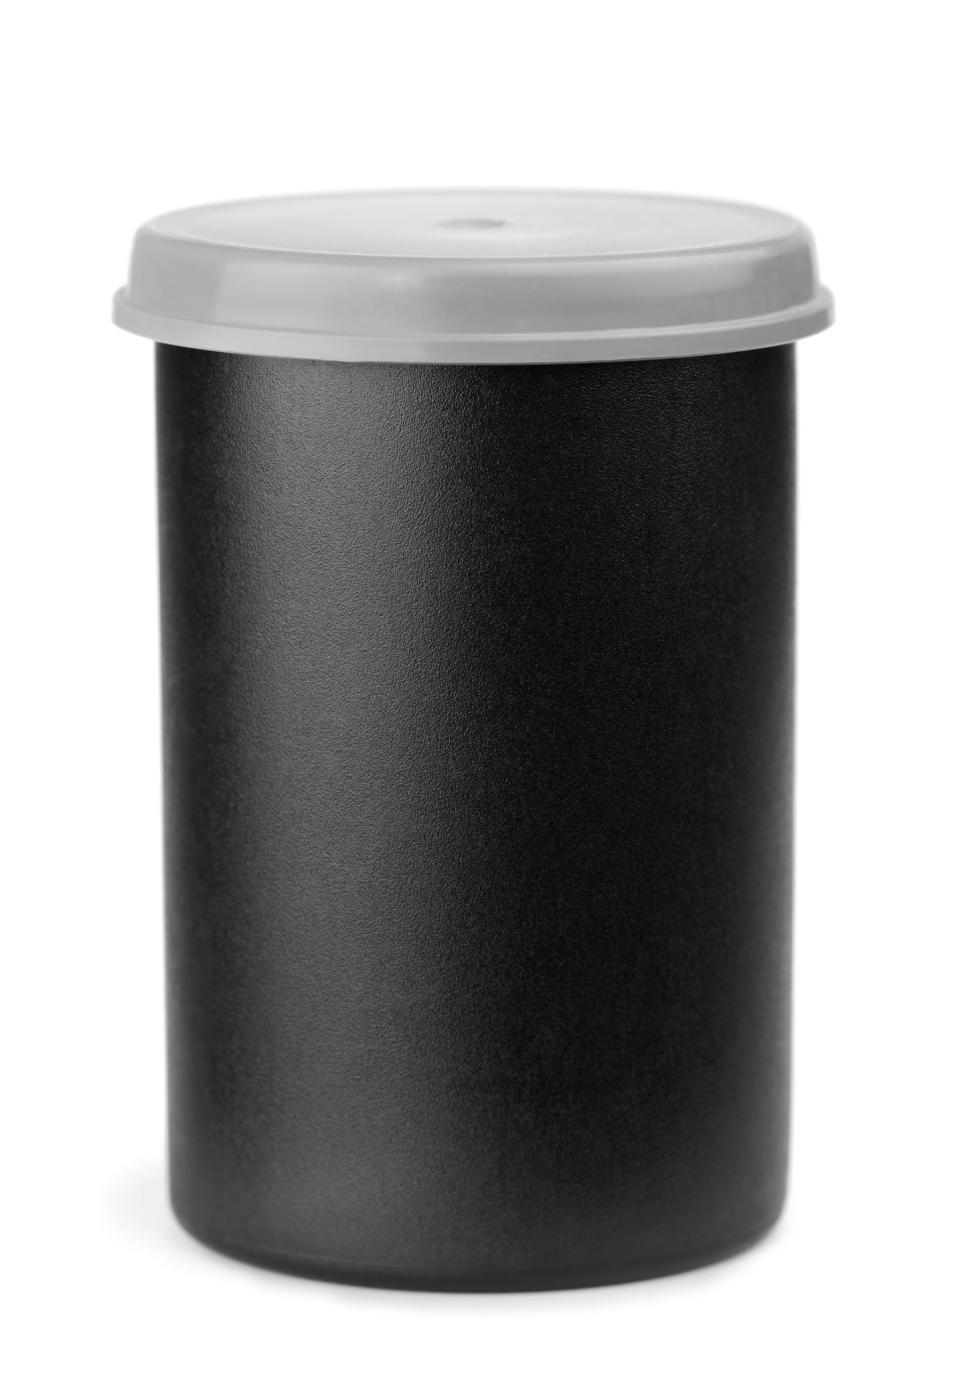 Black cylindrical container with a white lid, isolated on white background